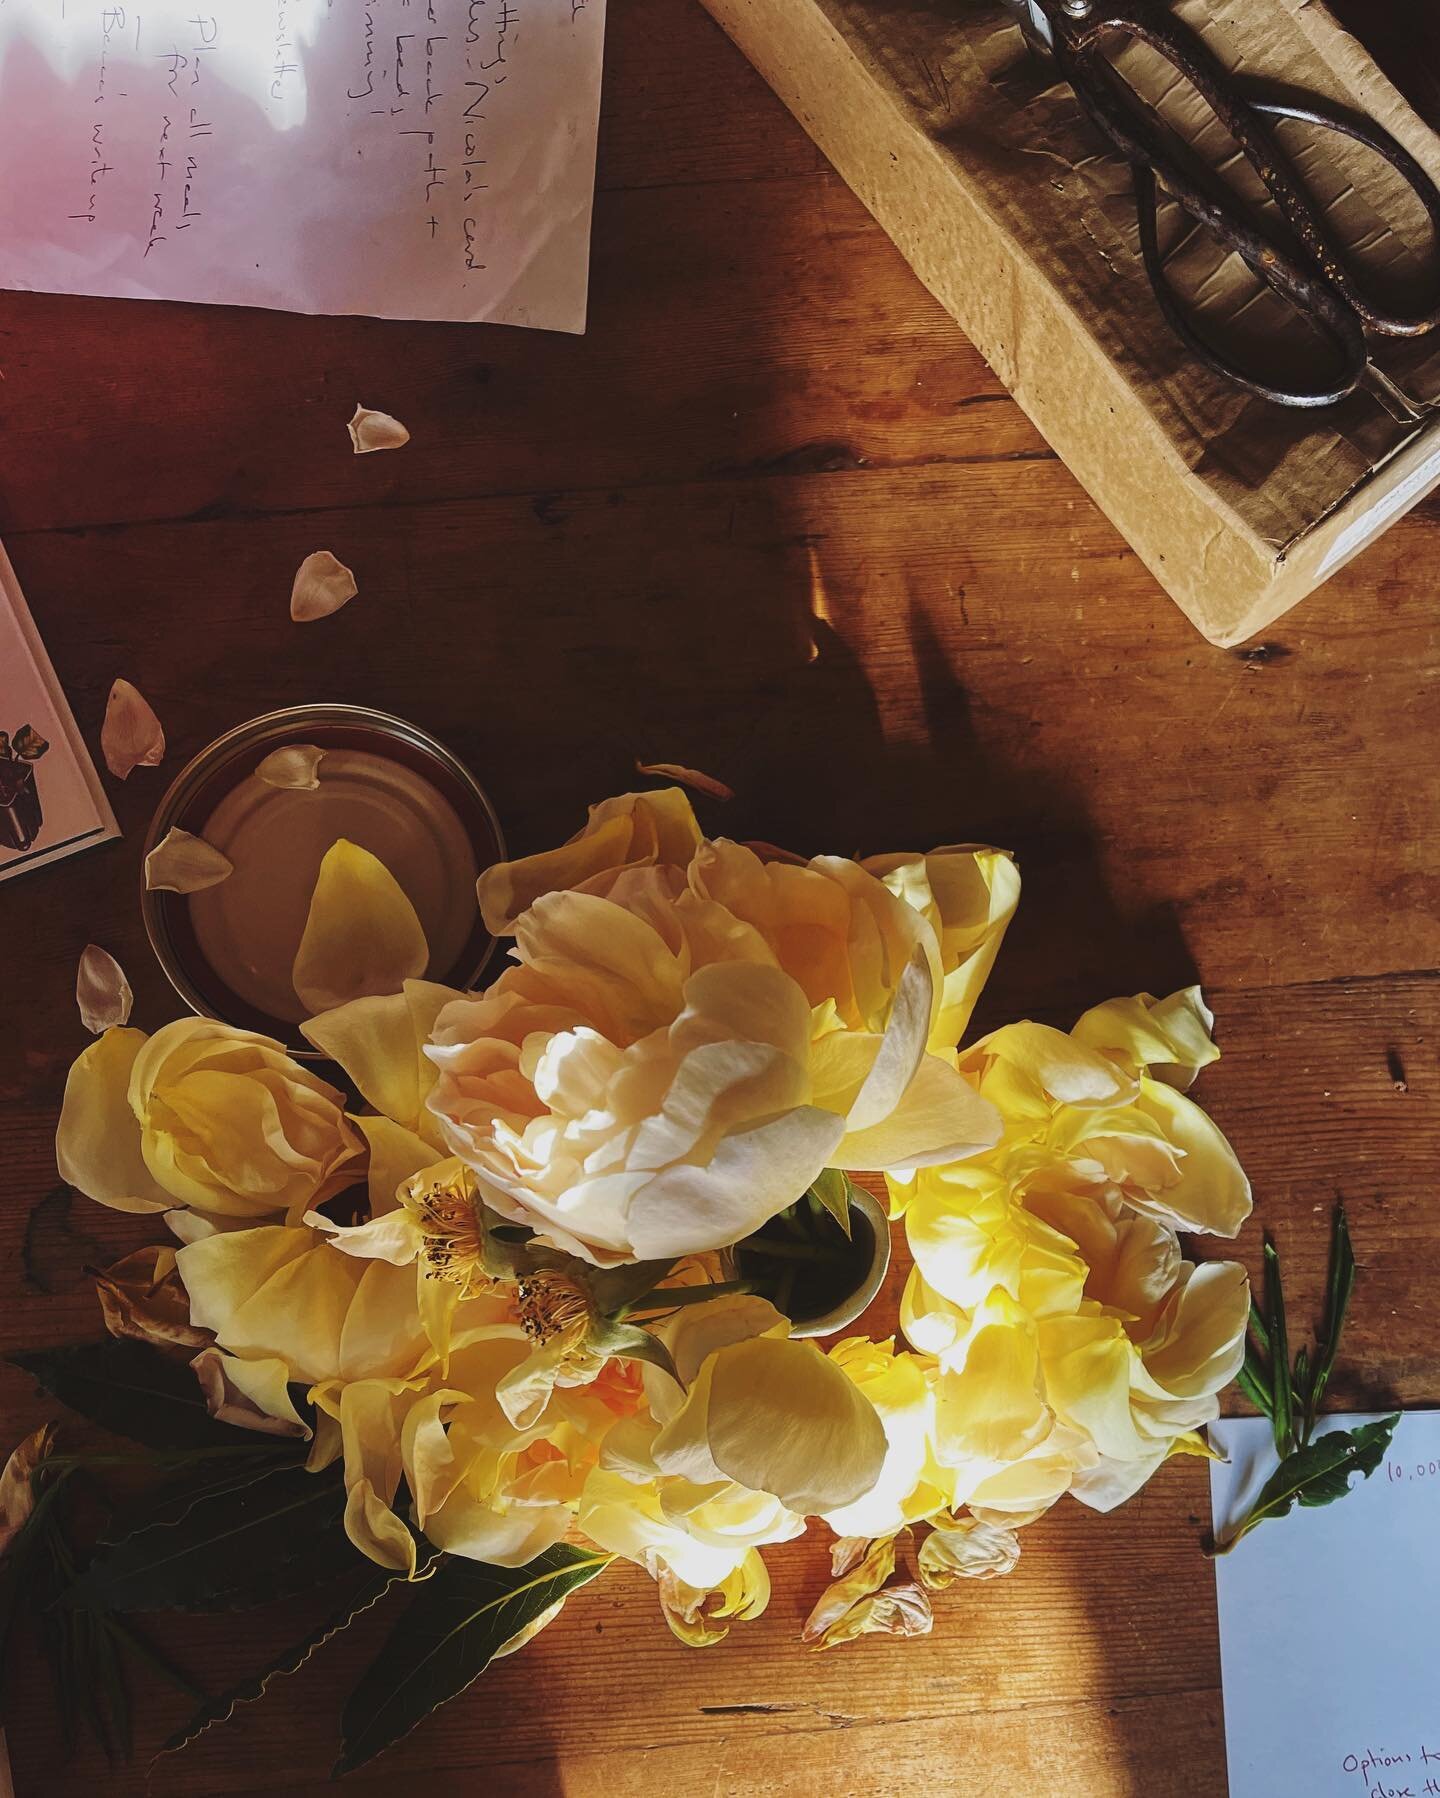 Kitchen table chaos. There are lists everywhere. I cropped this one a bit because otherwise you could read &lsquo;post on instagram consistently&rsquo; and it all felt a bit meta. In the philosophical sense obviously; I&rsquo;m not intending to theme